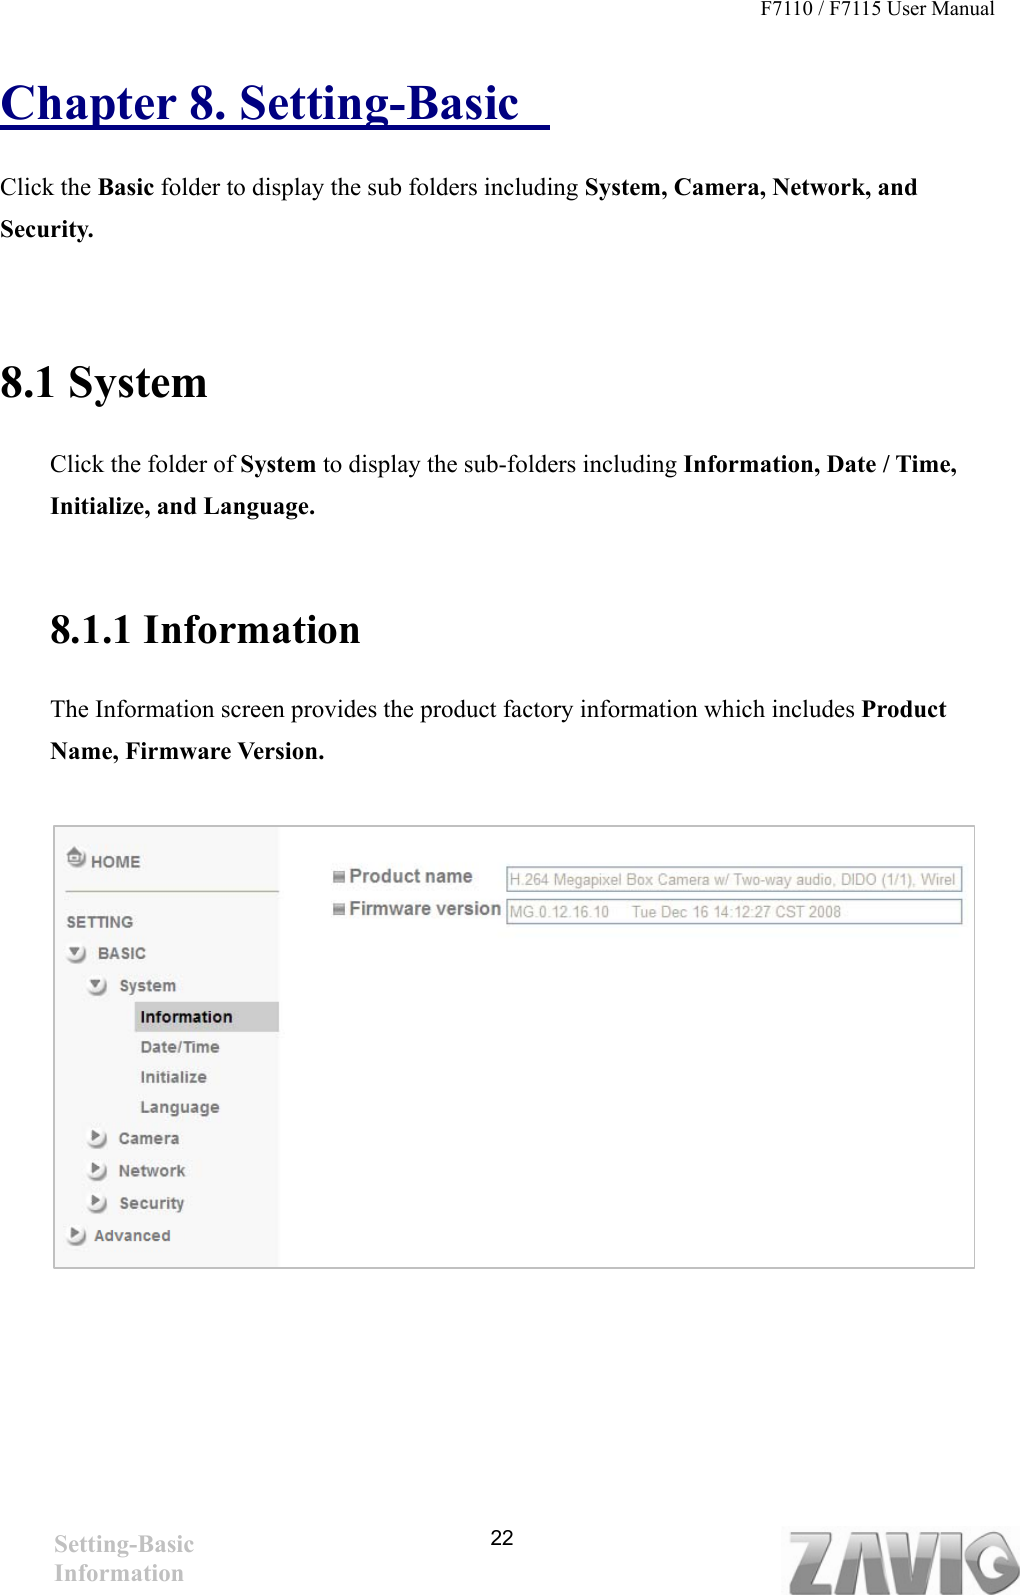 F7110 / F7115 User Manual   Chapter 8. Setting-Basic   Click the Basic folder to display the sub folders including System, Camera, Network, and Security.  8.1 System Click the folder of System to display the sub-folders including Information, Date / Time, Initialize, and Language.  8.1.1 Information The Information screen provides the product factory information which includes Product Name, Firmware Version.          Setting-Basic Information   22